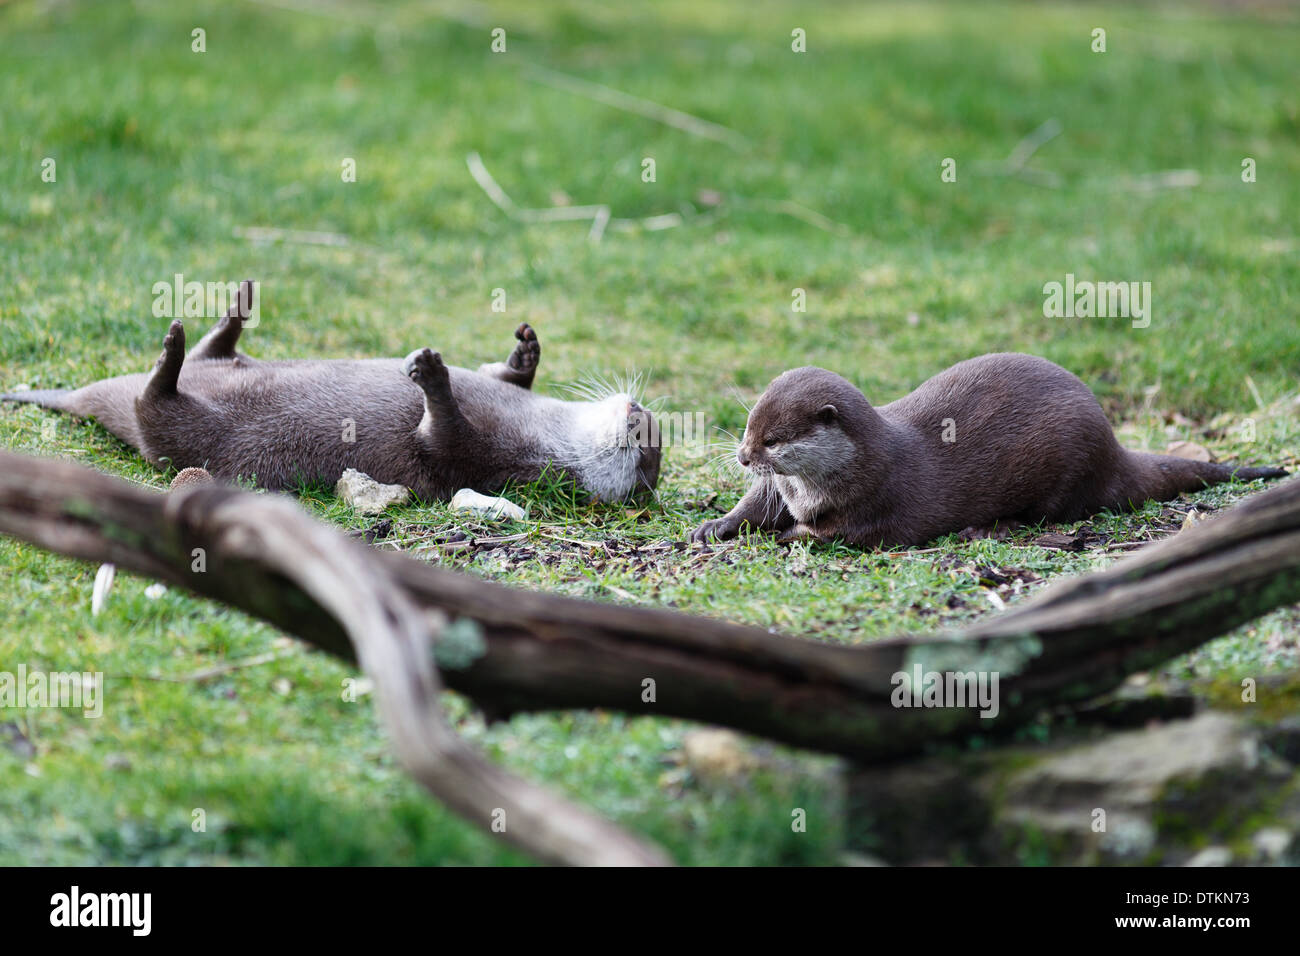 Otters playing on grass Stock Photo